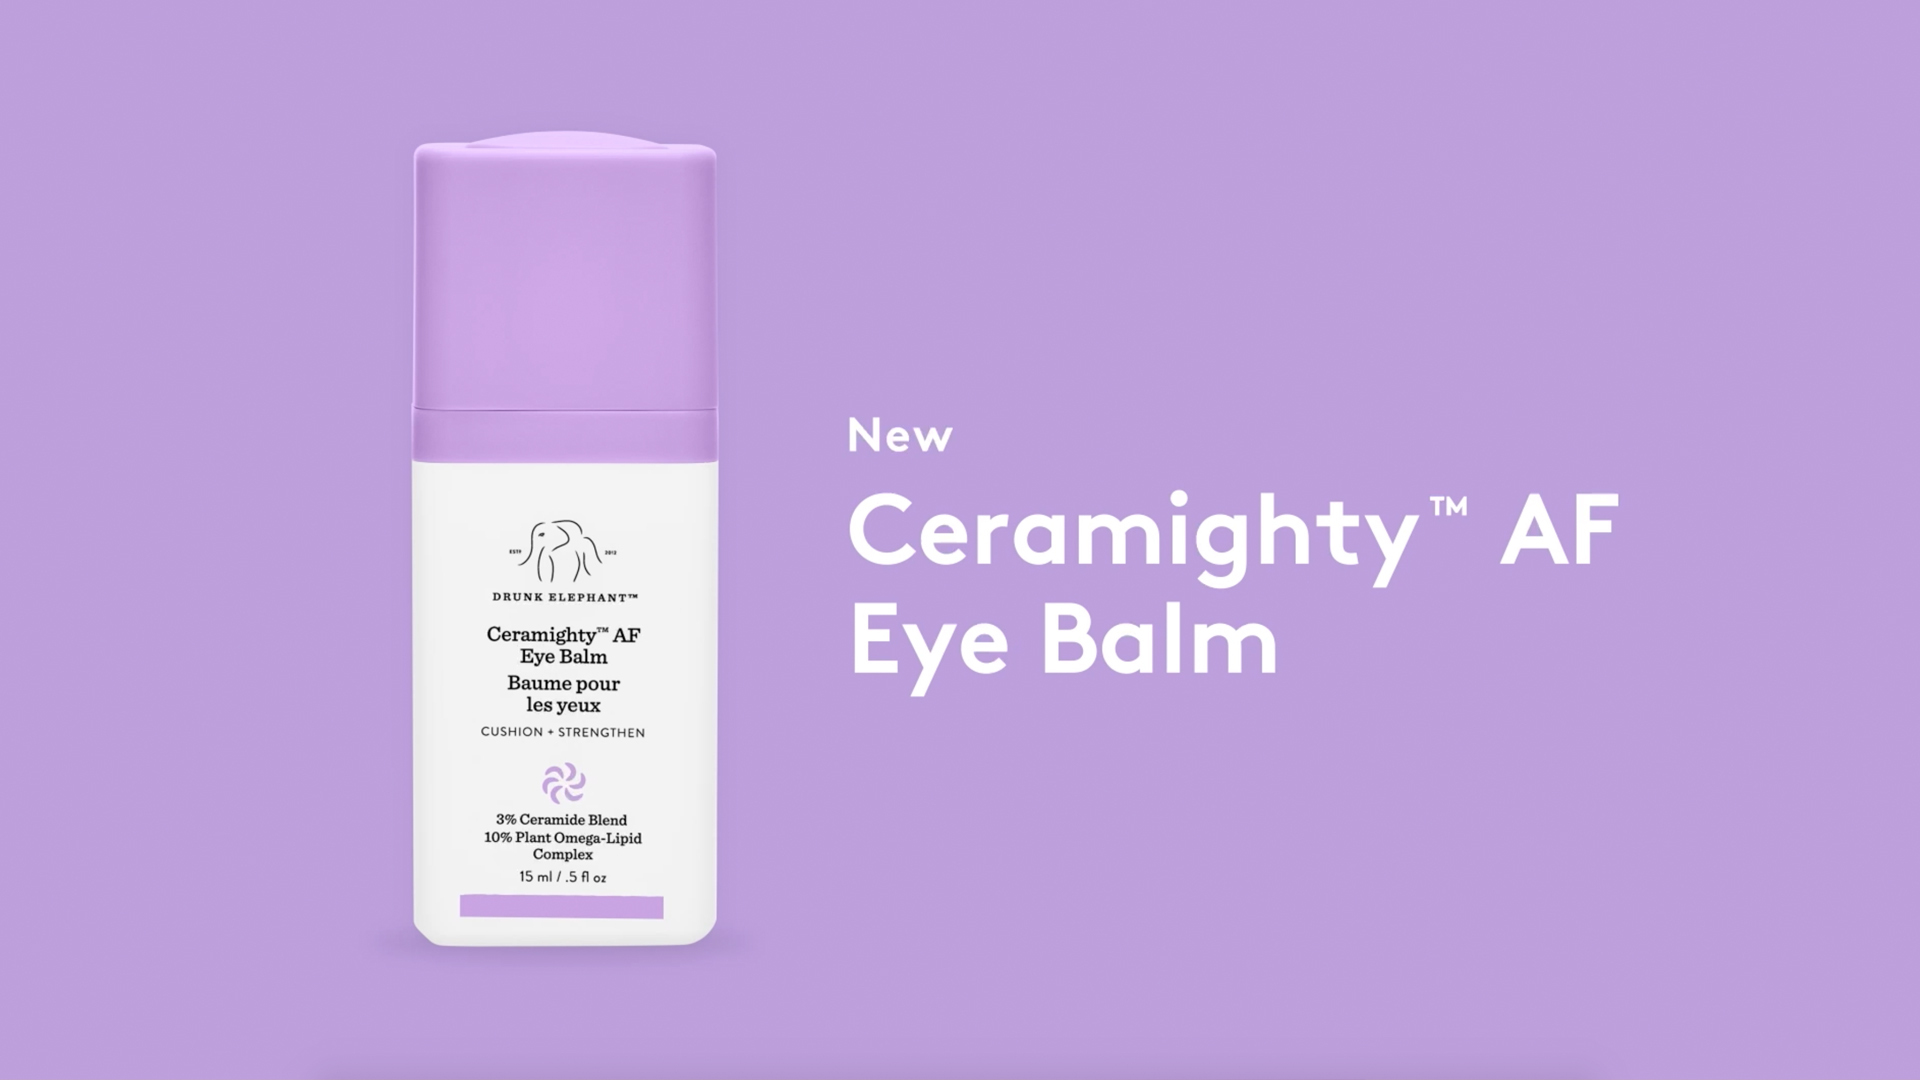 Video of Ellie trying and introducing Ceramighty Eye Balm.